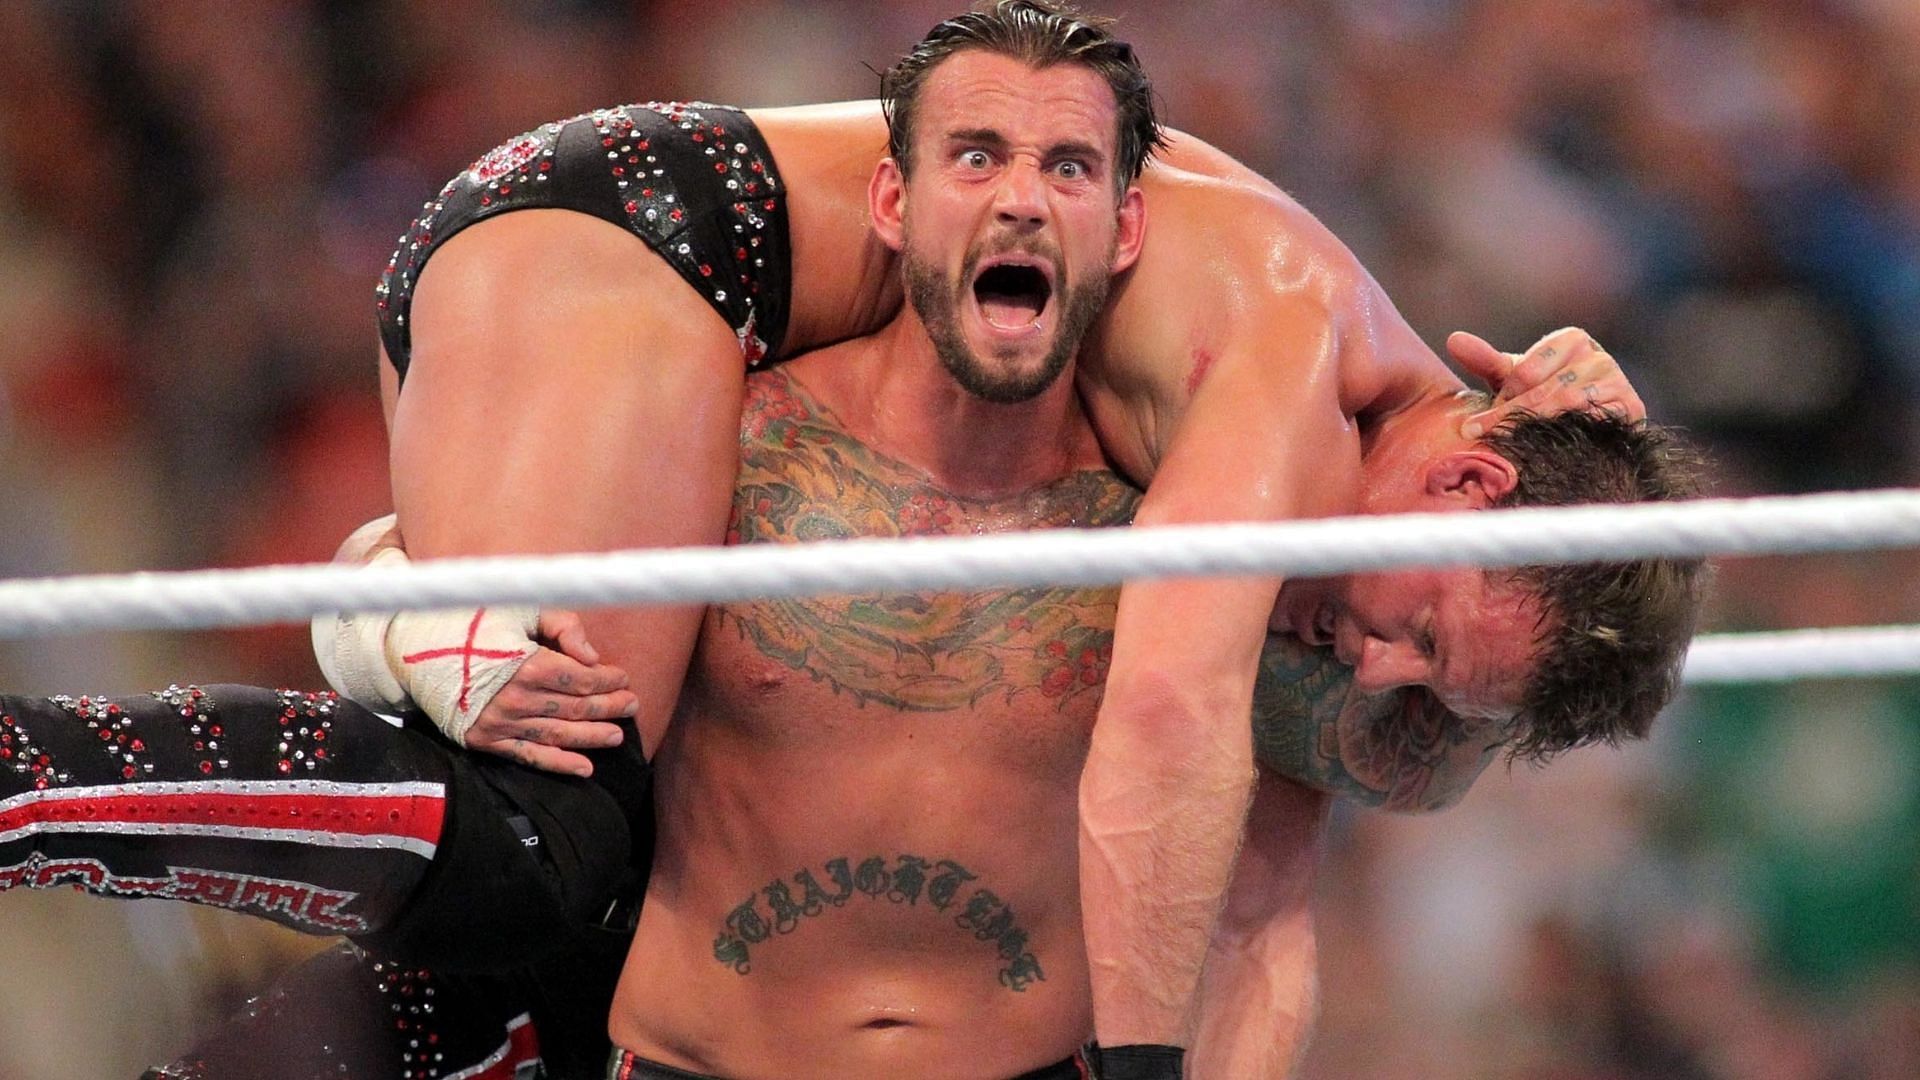 Will AEW be able to turn the CM Punk controversy into a major return angle?